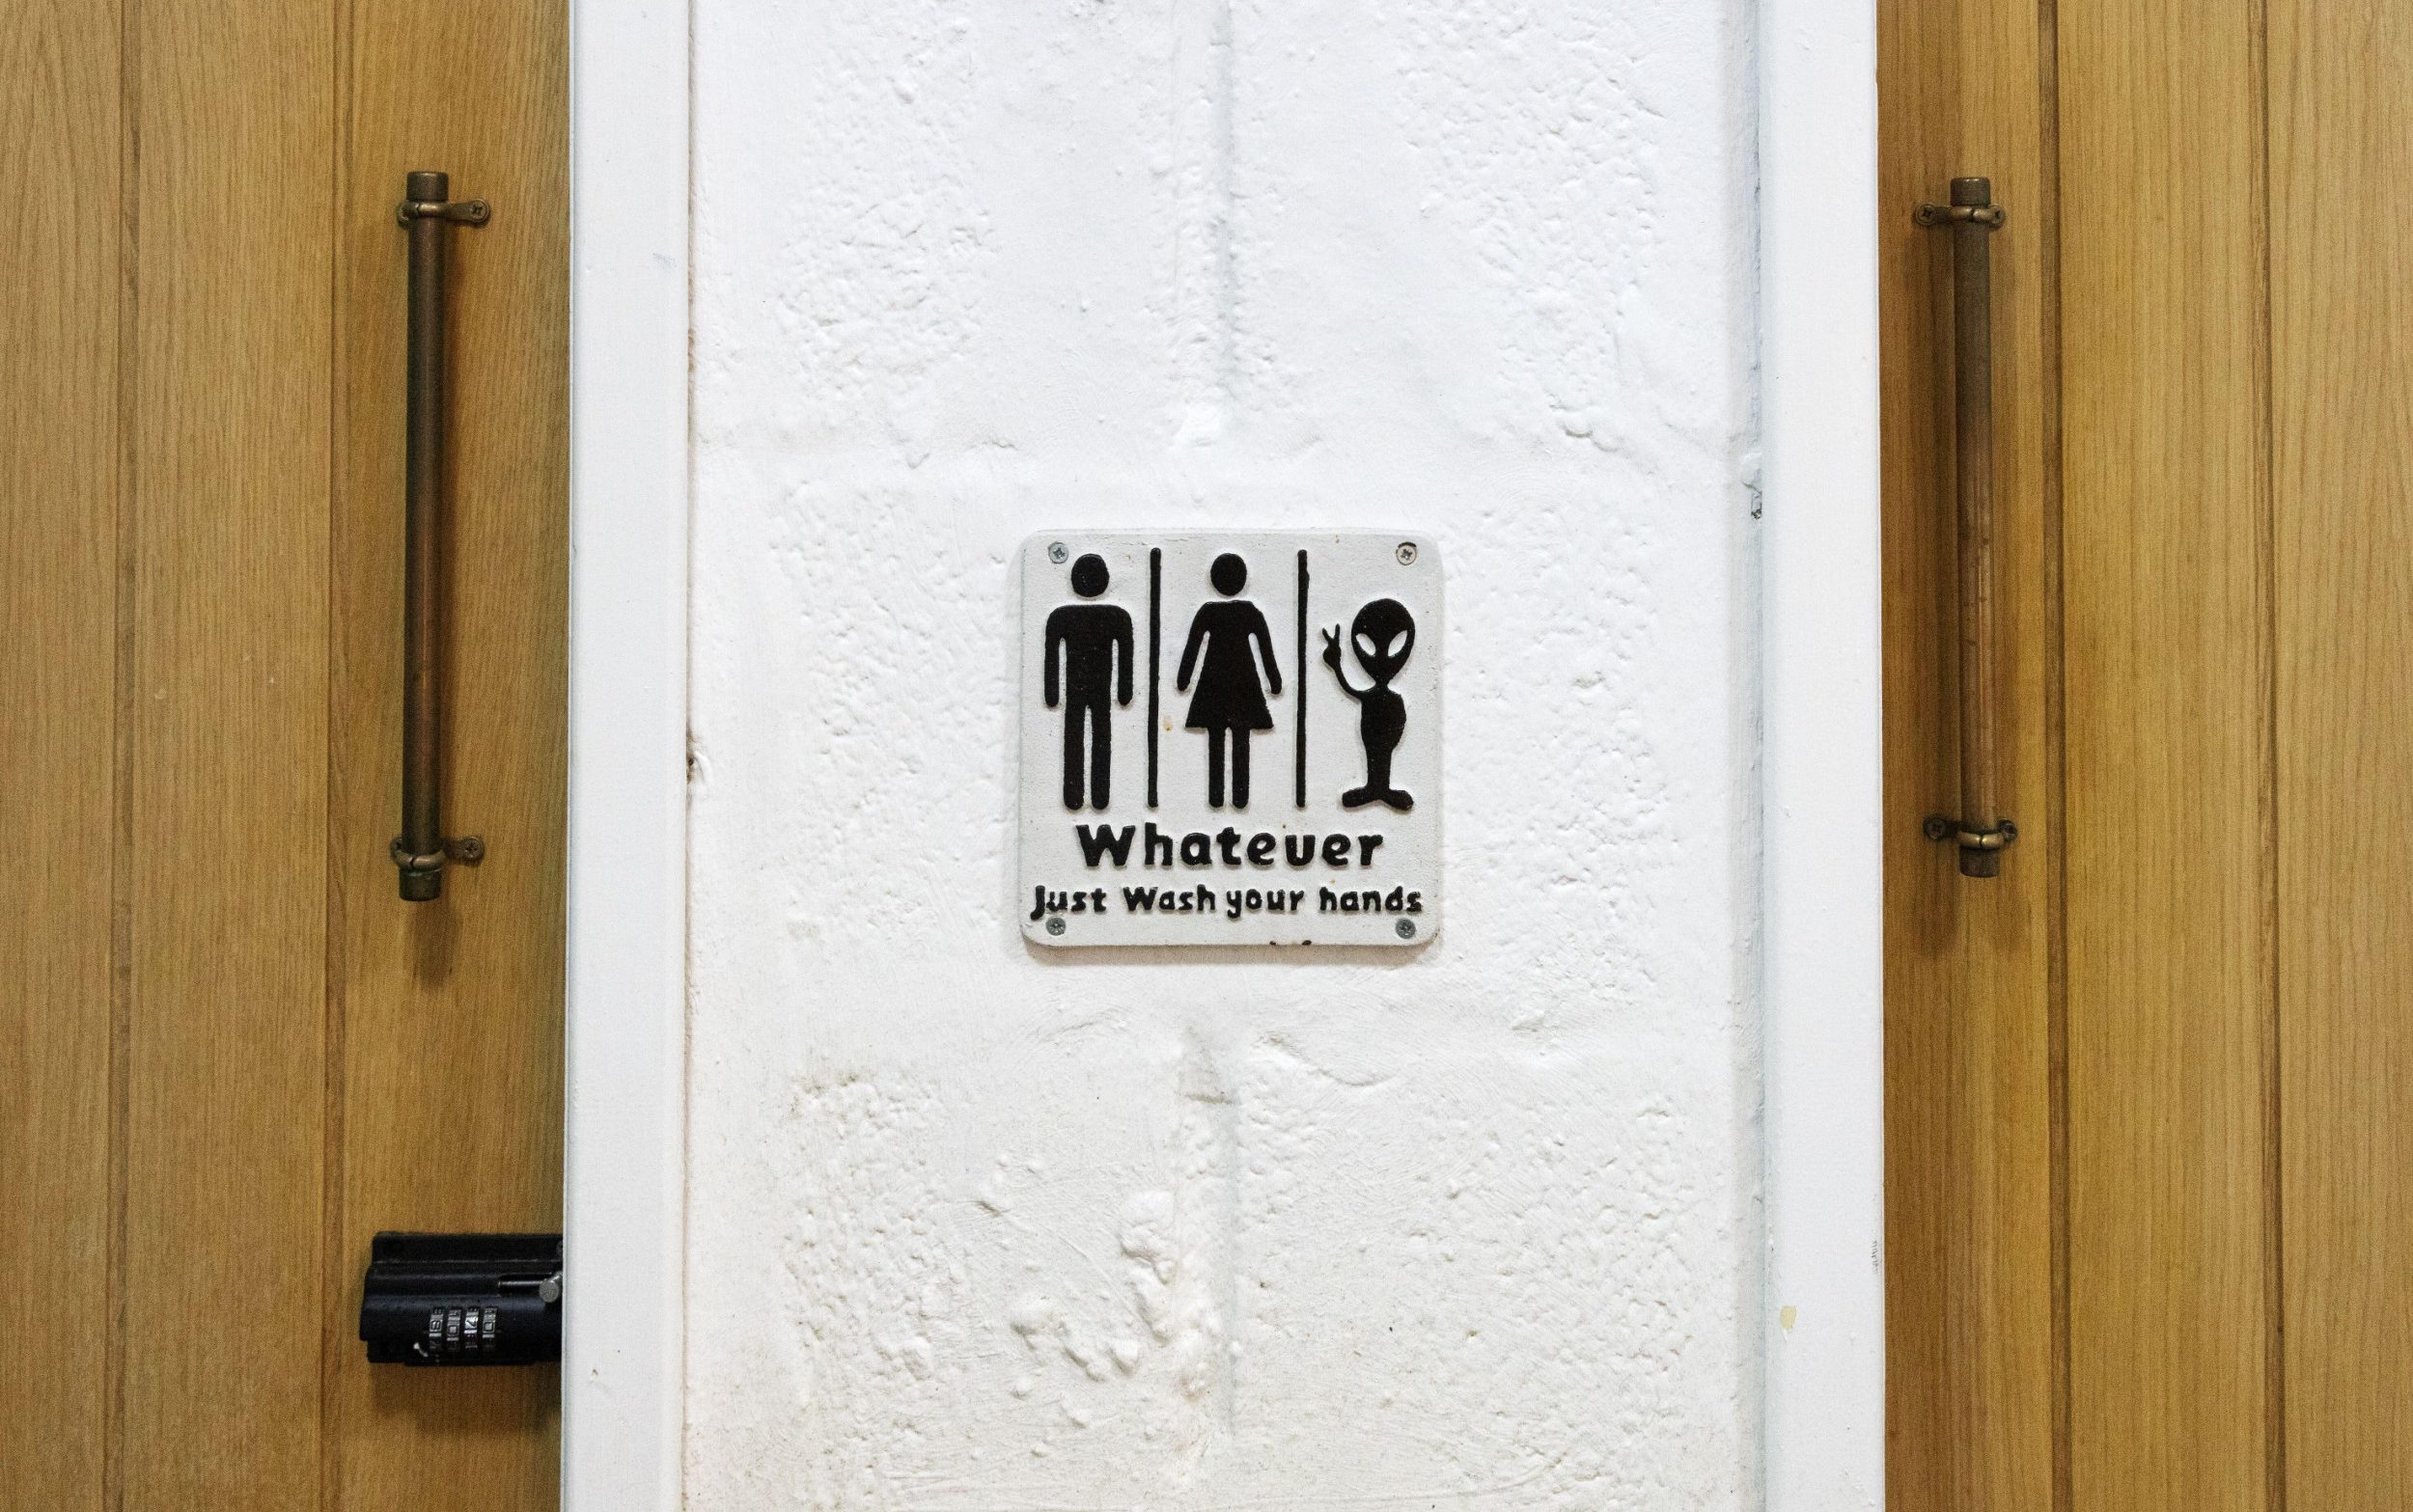 gender-neutral lavatories ‘have more germs than single-sex ones’